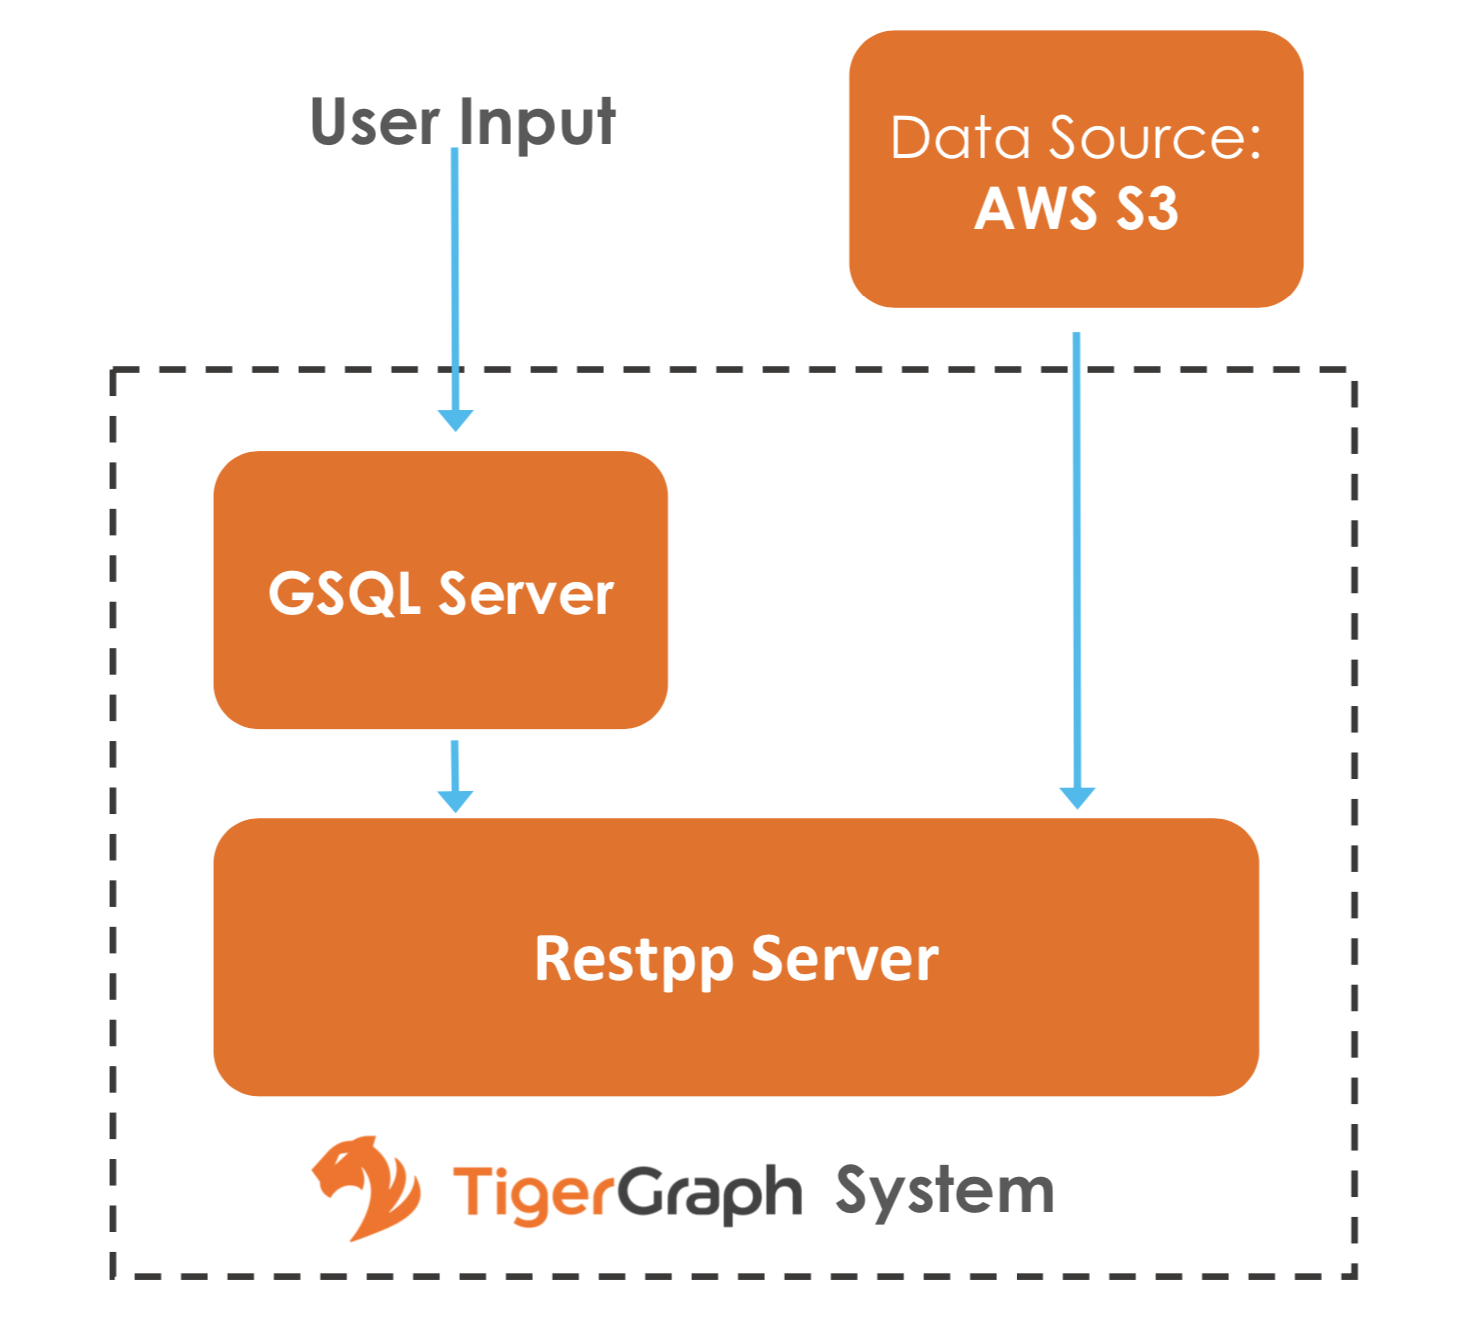 Diagram showing an area labeled TigerGraph System, containing the GSQL server and RESTPP server. Outside the system, User Input feeds into the GSQL Server, which then feeds into the RESTPP Server. An AWS S3 Data Source feeds directly into the RESTPP Server.